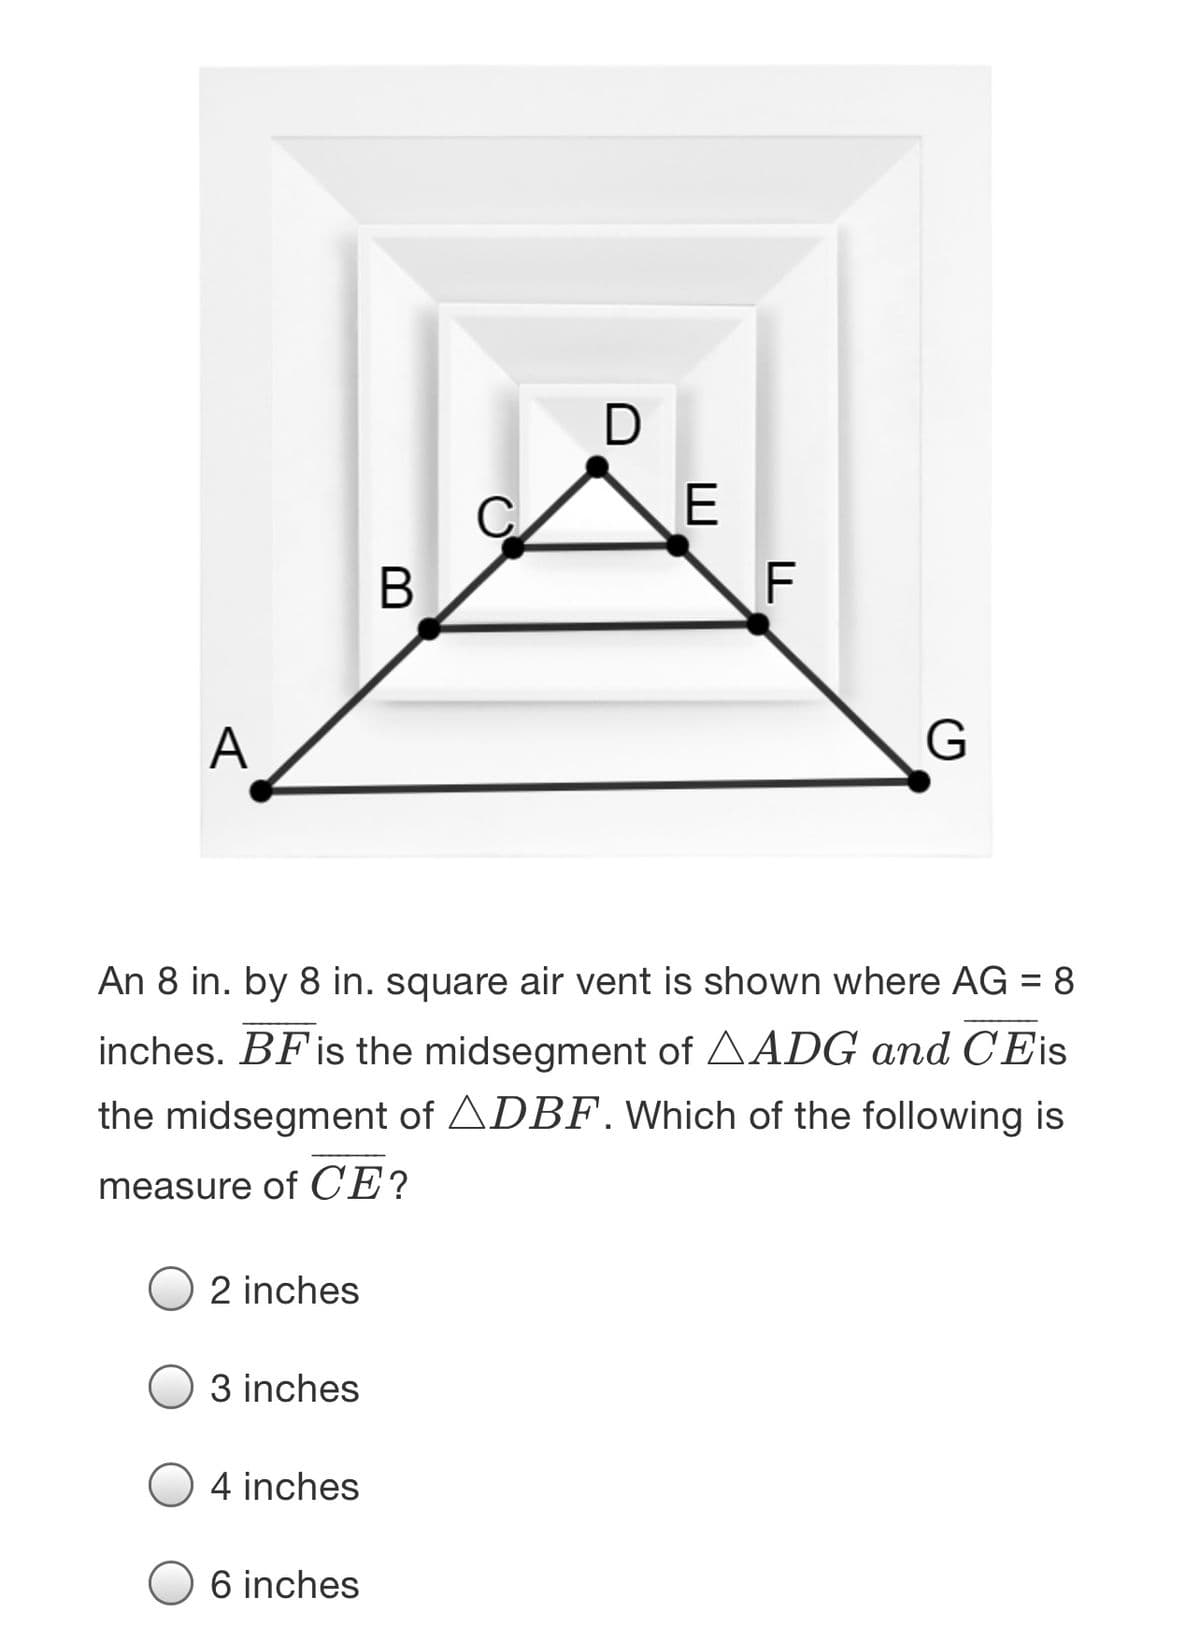 В
F
A
An 8 in. by 8 in. square air vent is shown where AG = 8
inches. BFis the midsegment of AADG and CEis
the midsegment of ADBF. Which of the following is
measure of CE?
2 inches
3 inches
4 inches
6 inches
